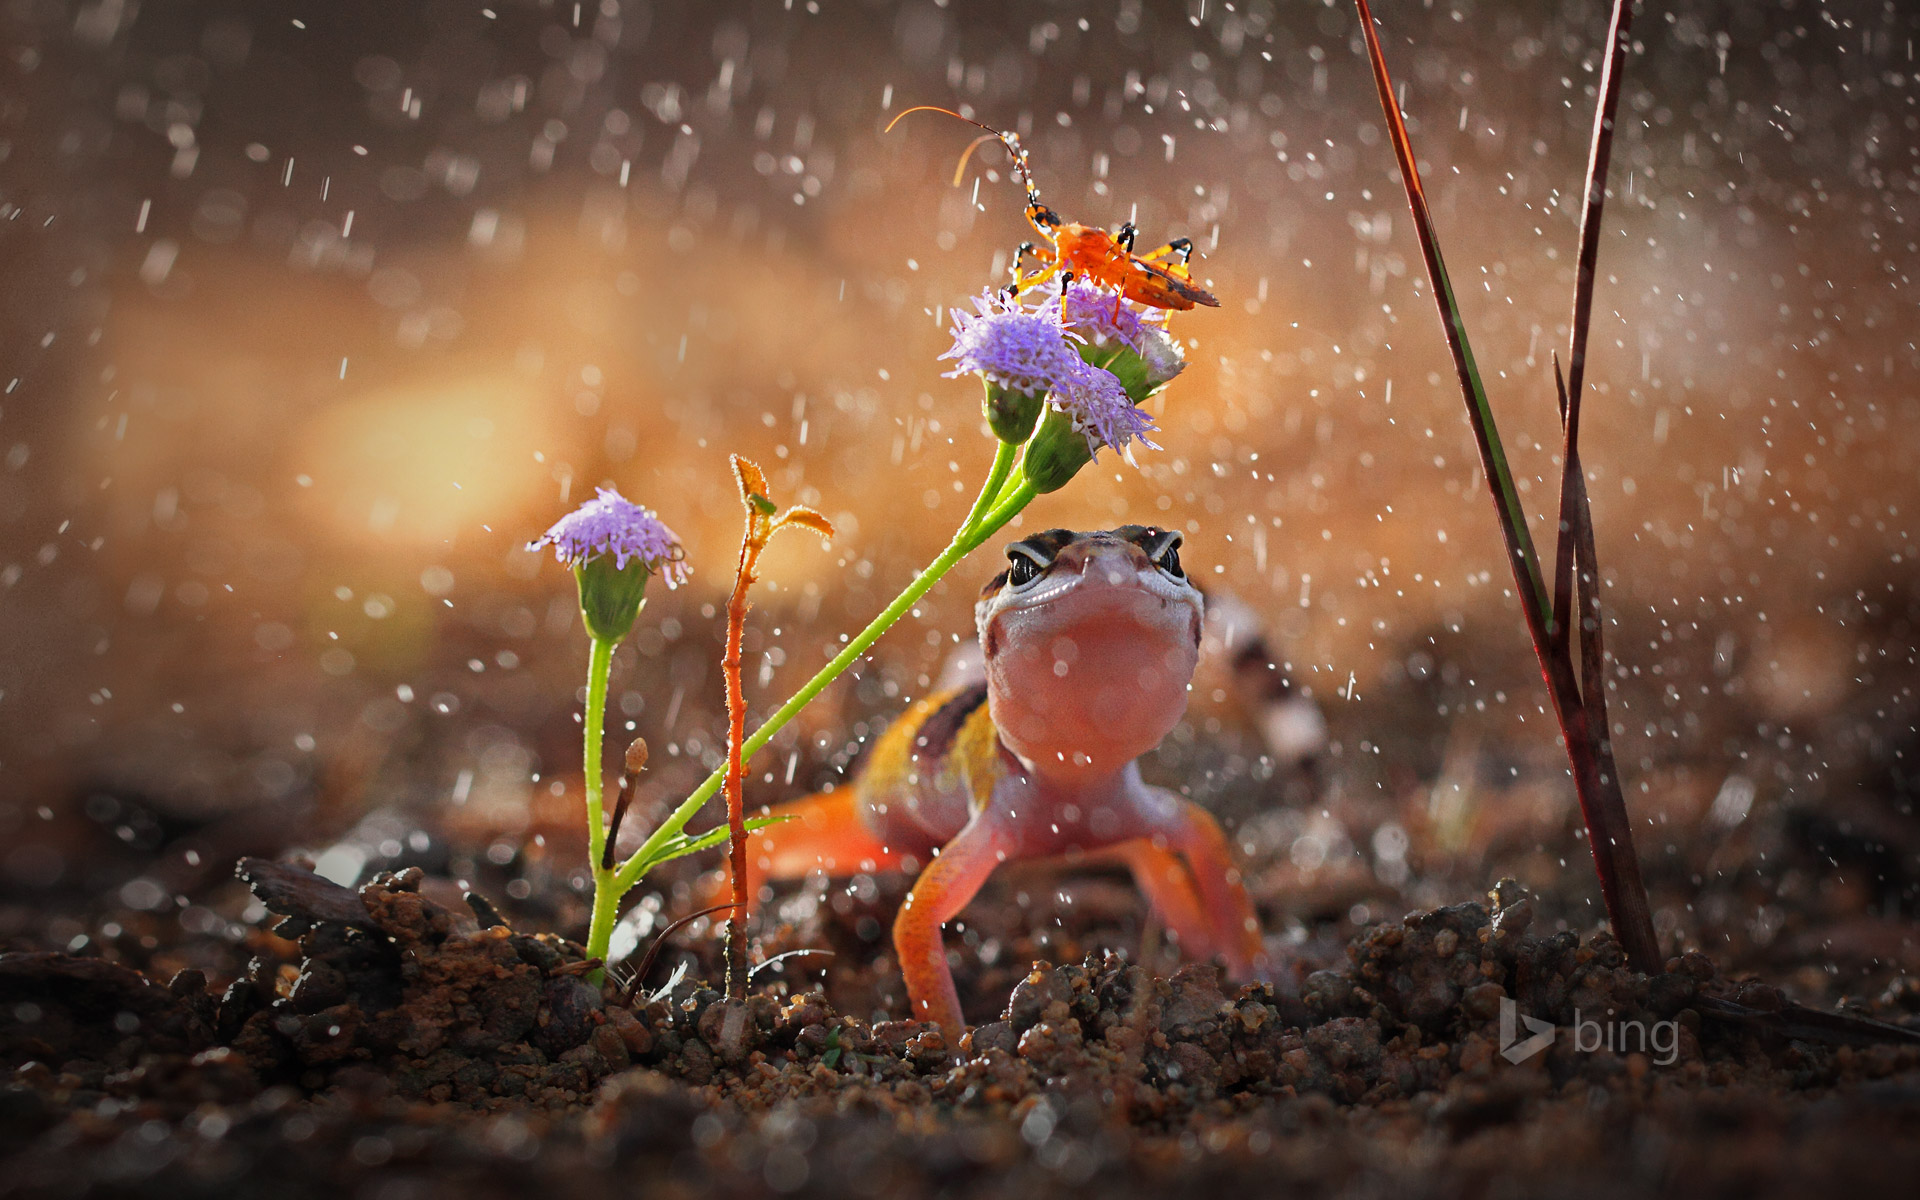 Gecko and insect on rainy day, Indonesia